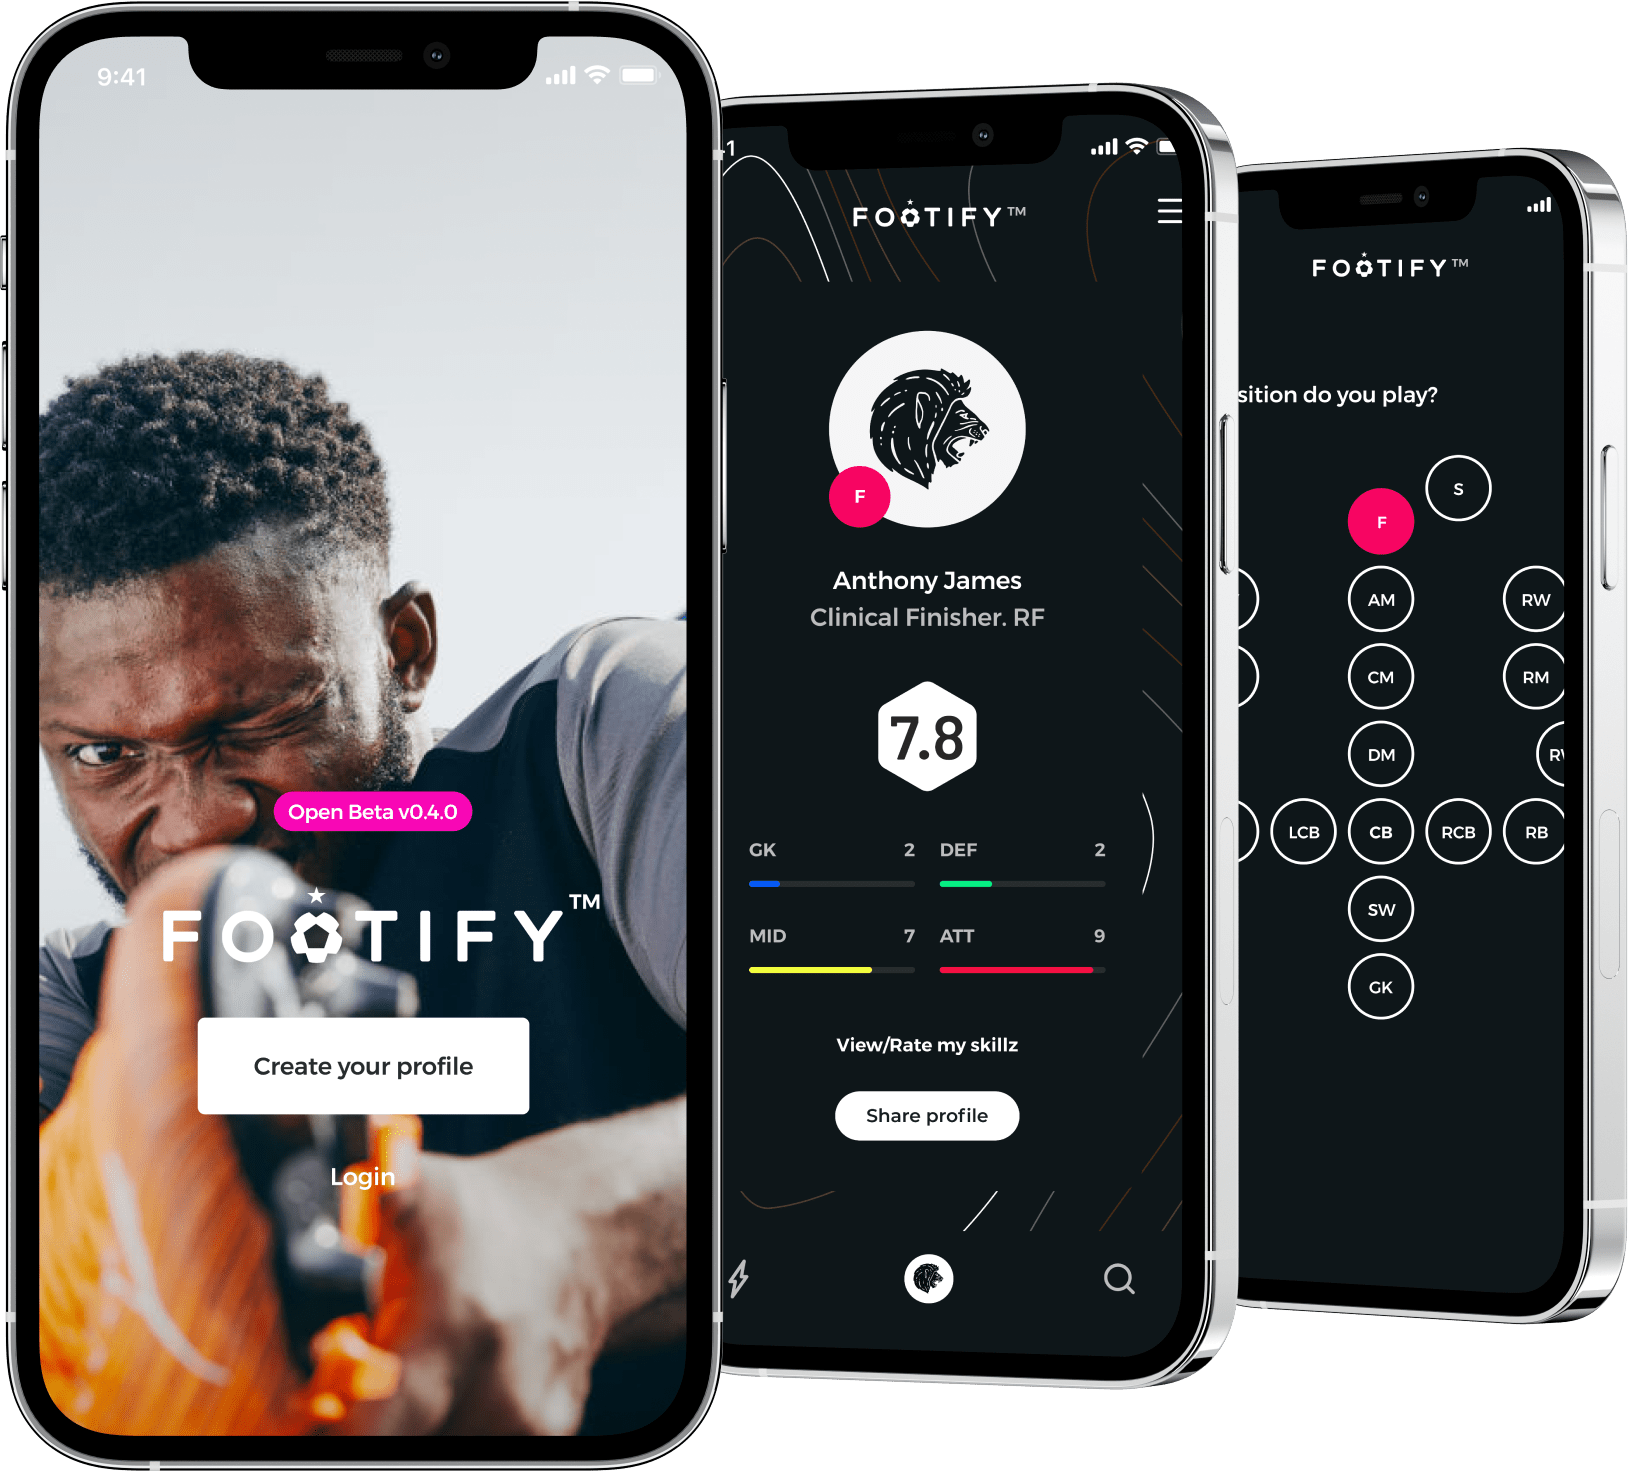 Footify: Play. Track. Share.